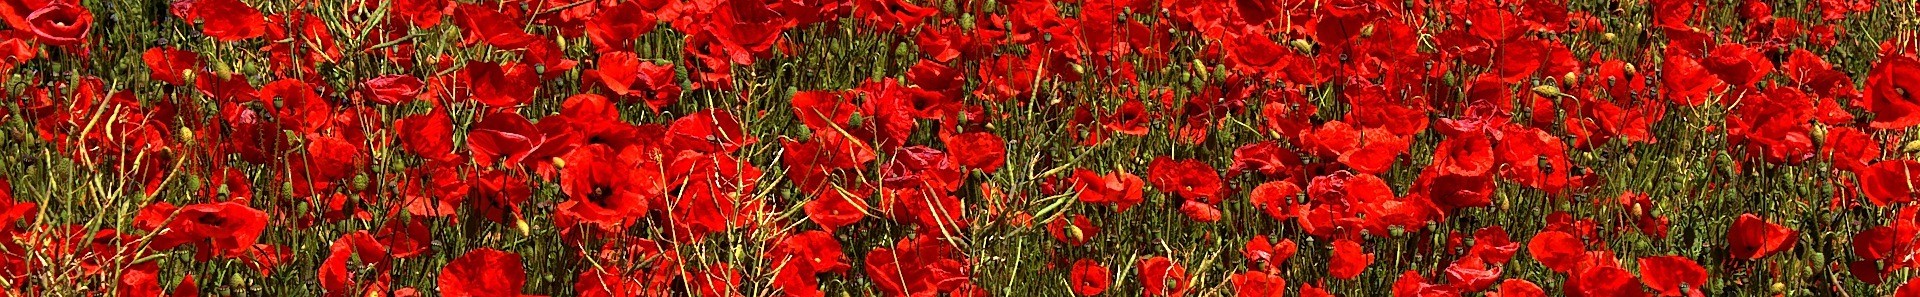 RED POPPIES IN A FIELD